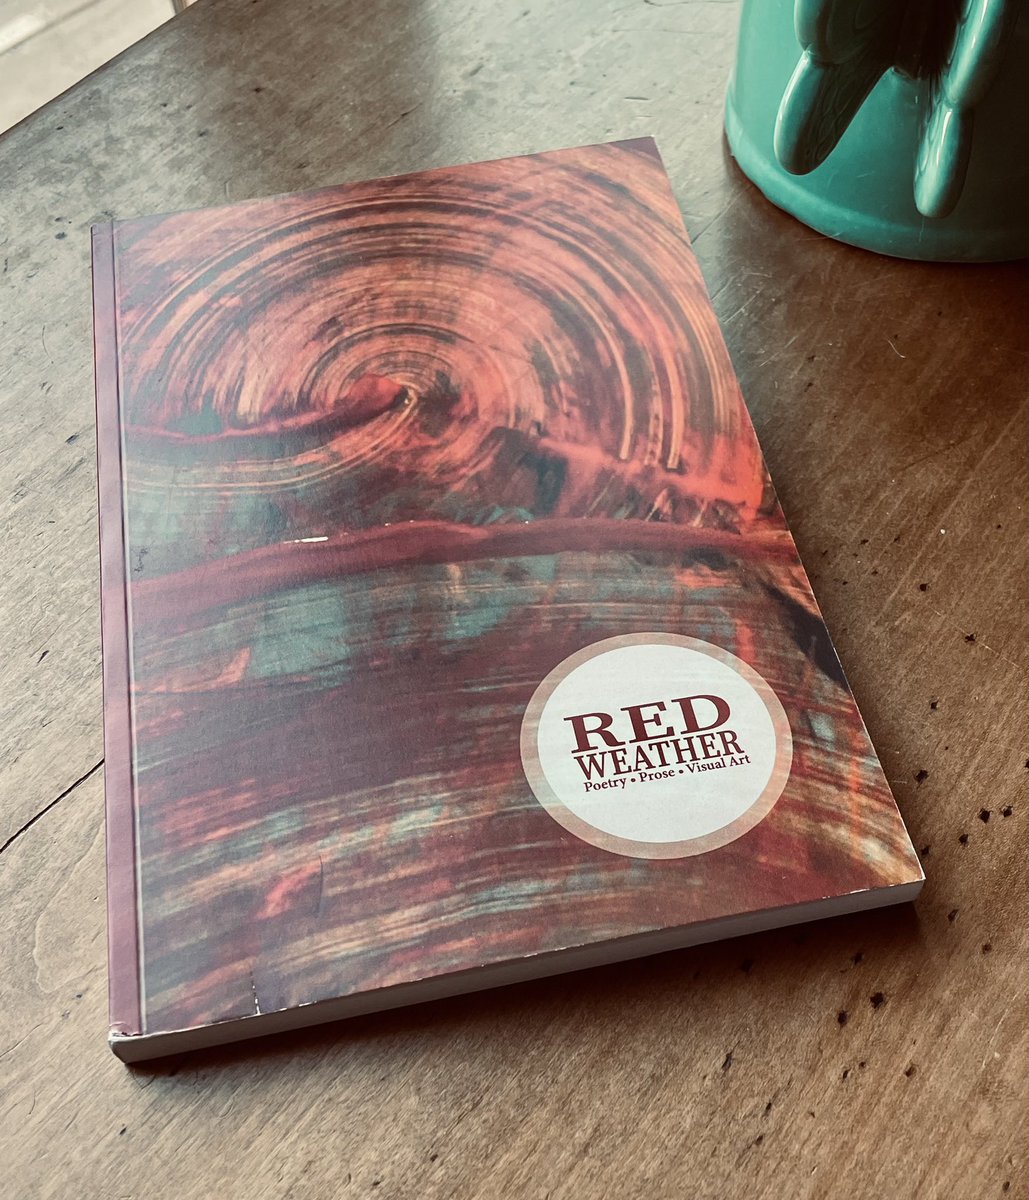 Friends, my poem “As the Desert” is in the new issue of Red Weather, the literary journal of Minnesota State U. - Moorhead. Humbled by the incredible contributors, words and art. Thank you @RedWeatherMN. Hope you enjoy it! https://t.co/DlEJDQAzZV